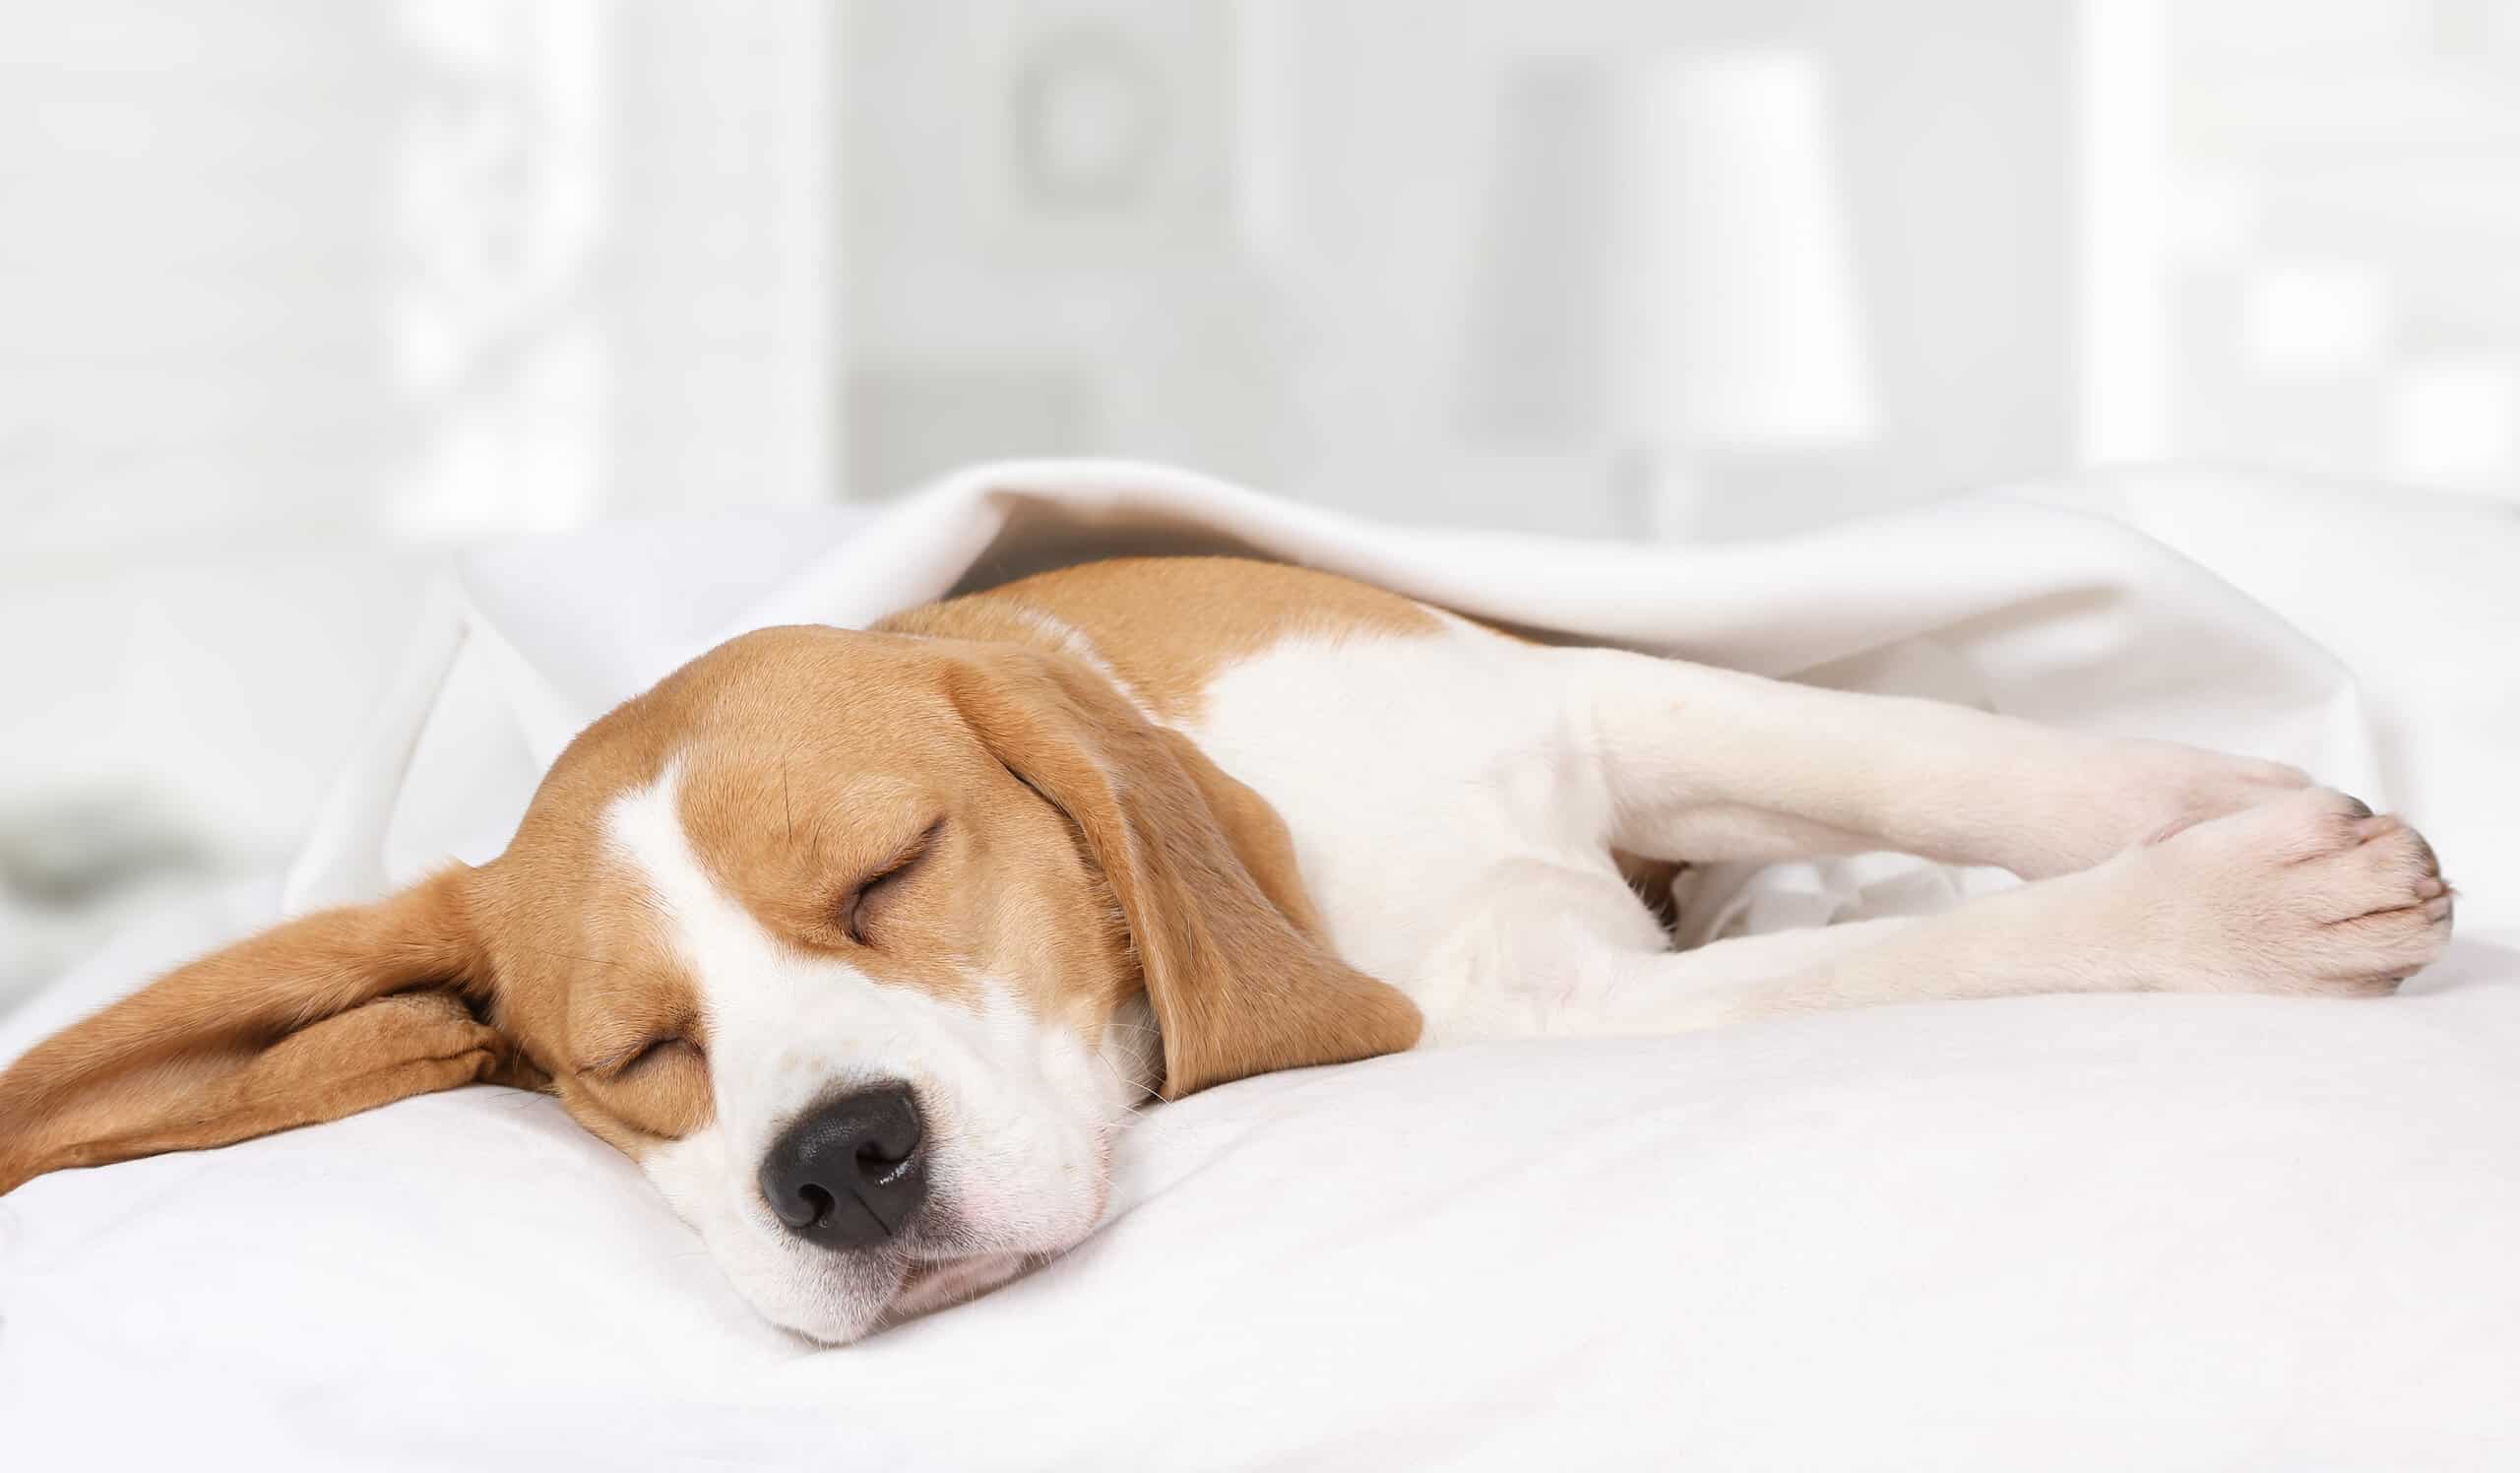 how much sleep do 2 year old dogs need